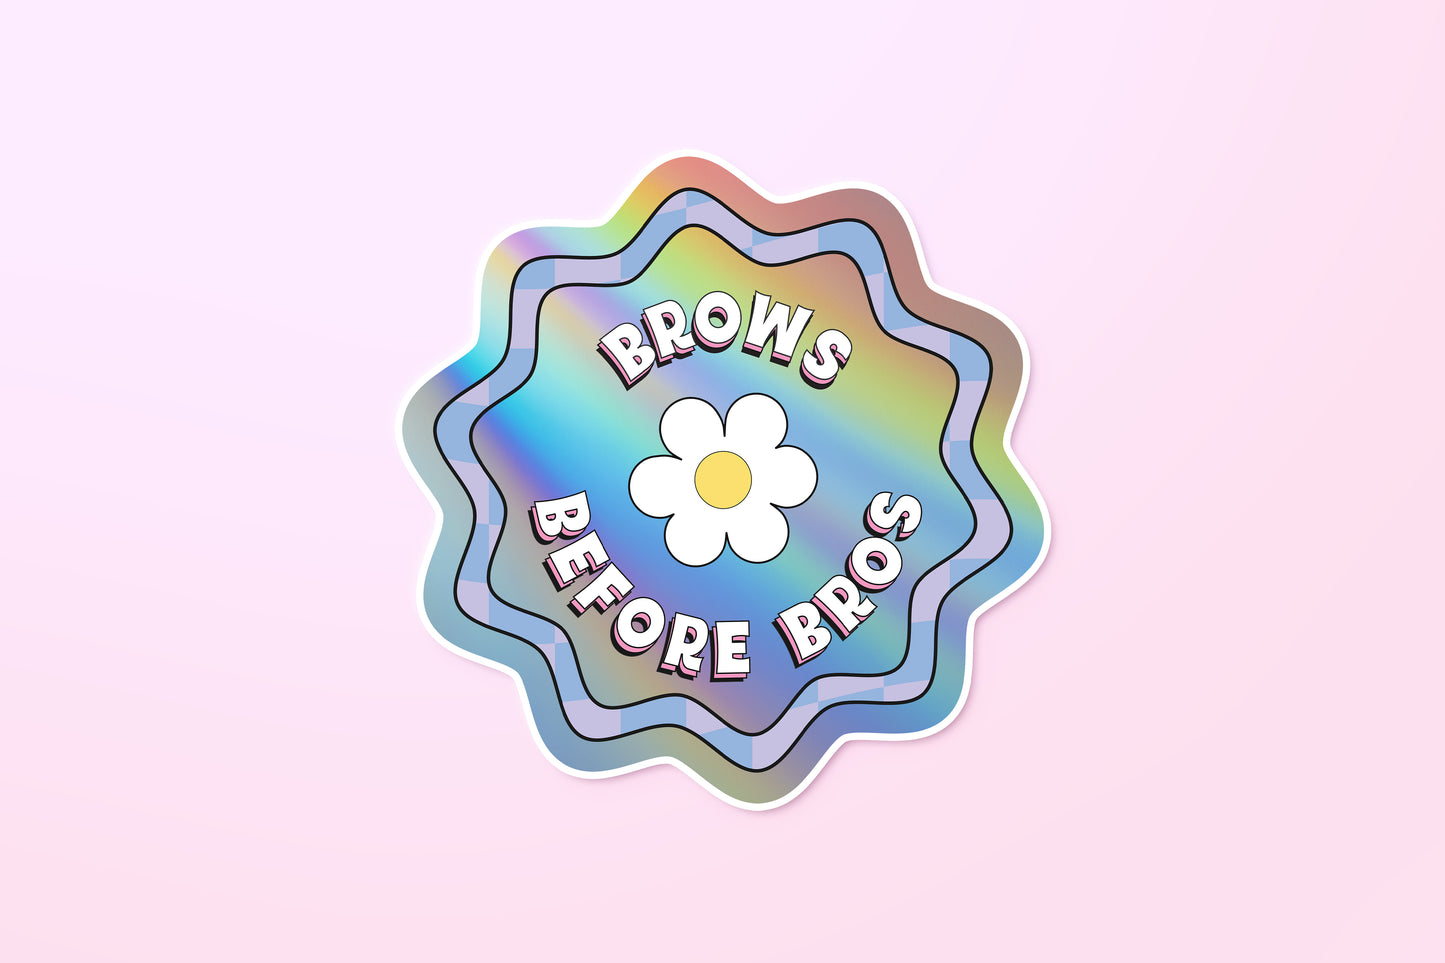 Brows before Brows Sticker (Holographic)